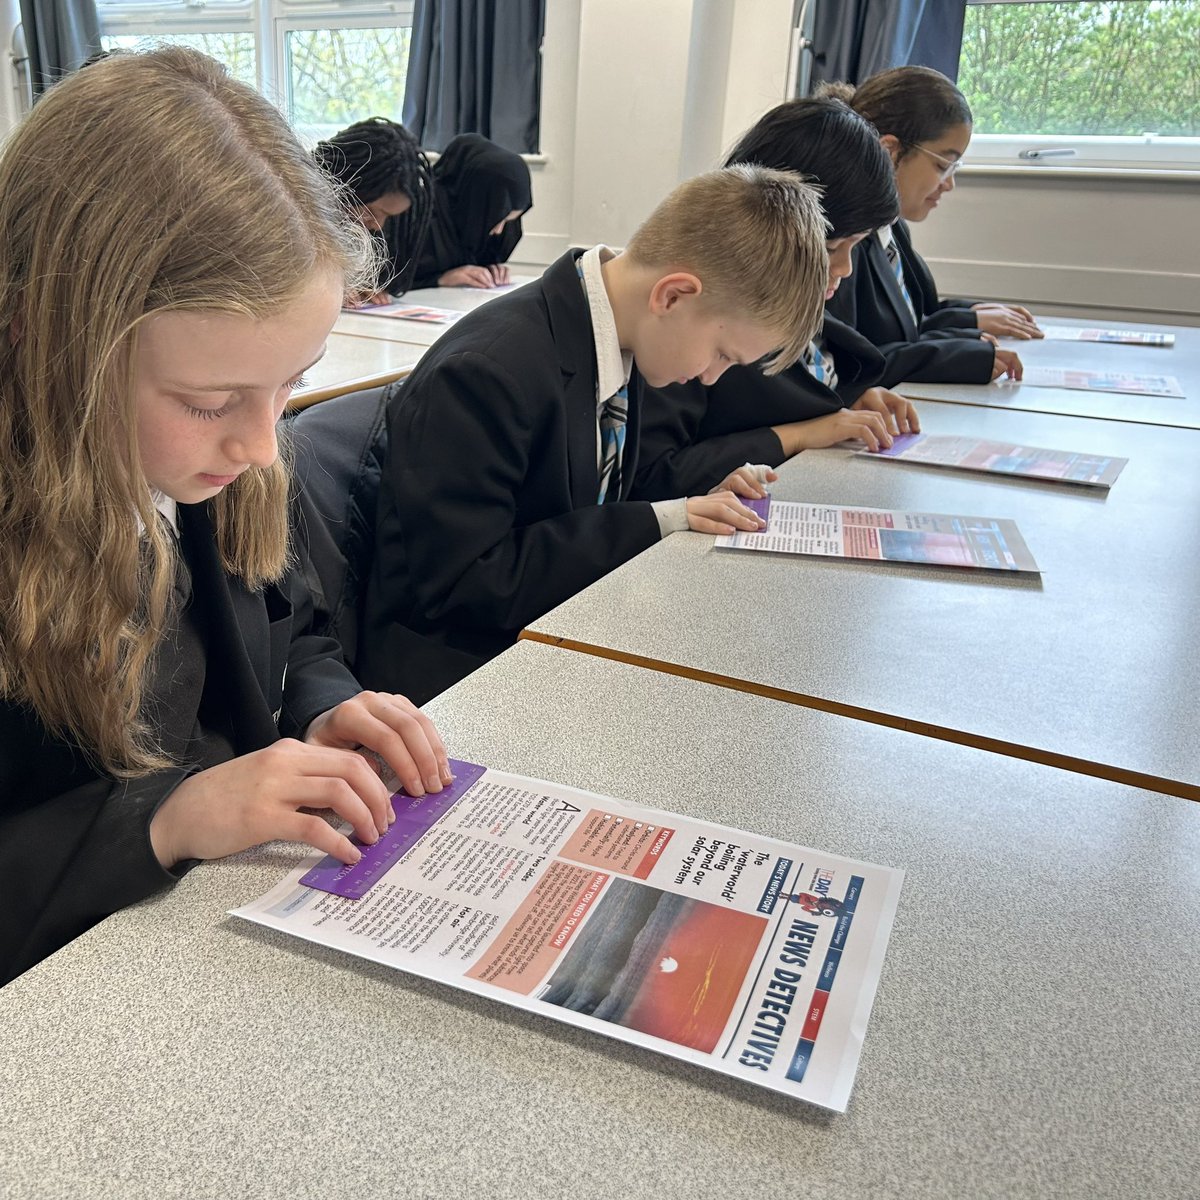 We’ve invested in reading rulers for every student in the academy to help improve focus and fluency. It’s fantastic to see students making great use of them during our morning tutor time programme. #HighExpectations